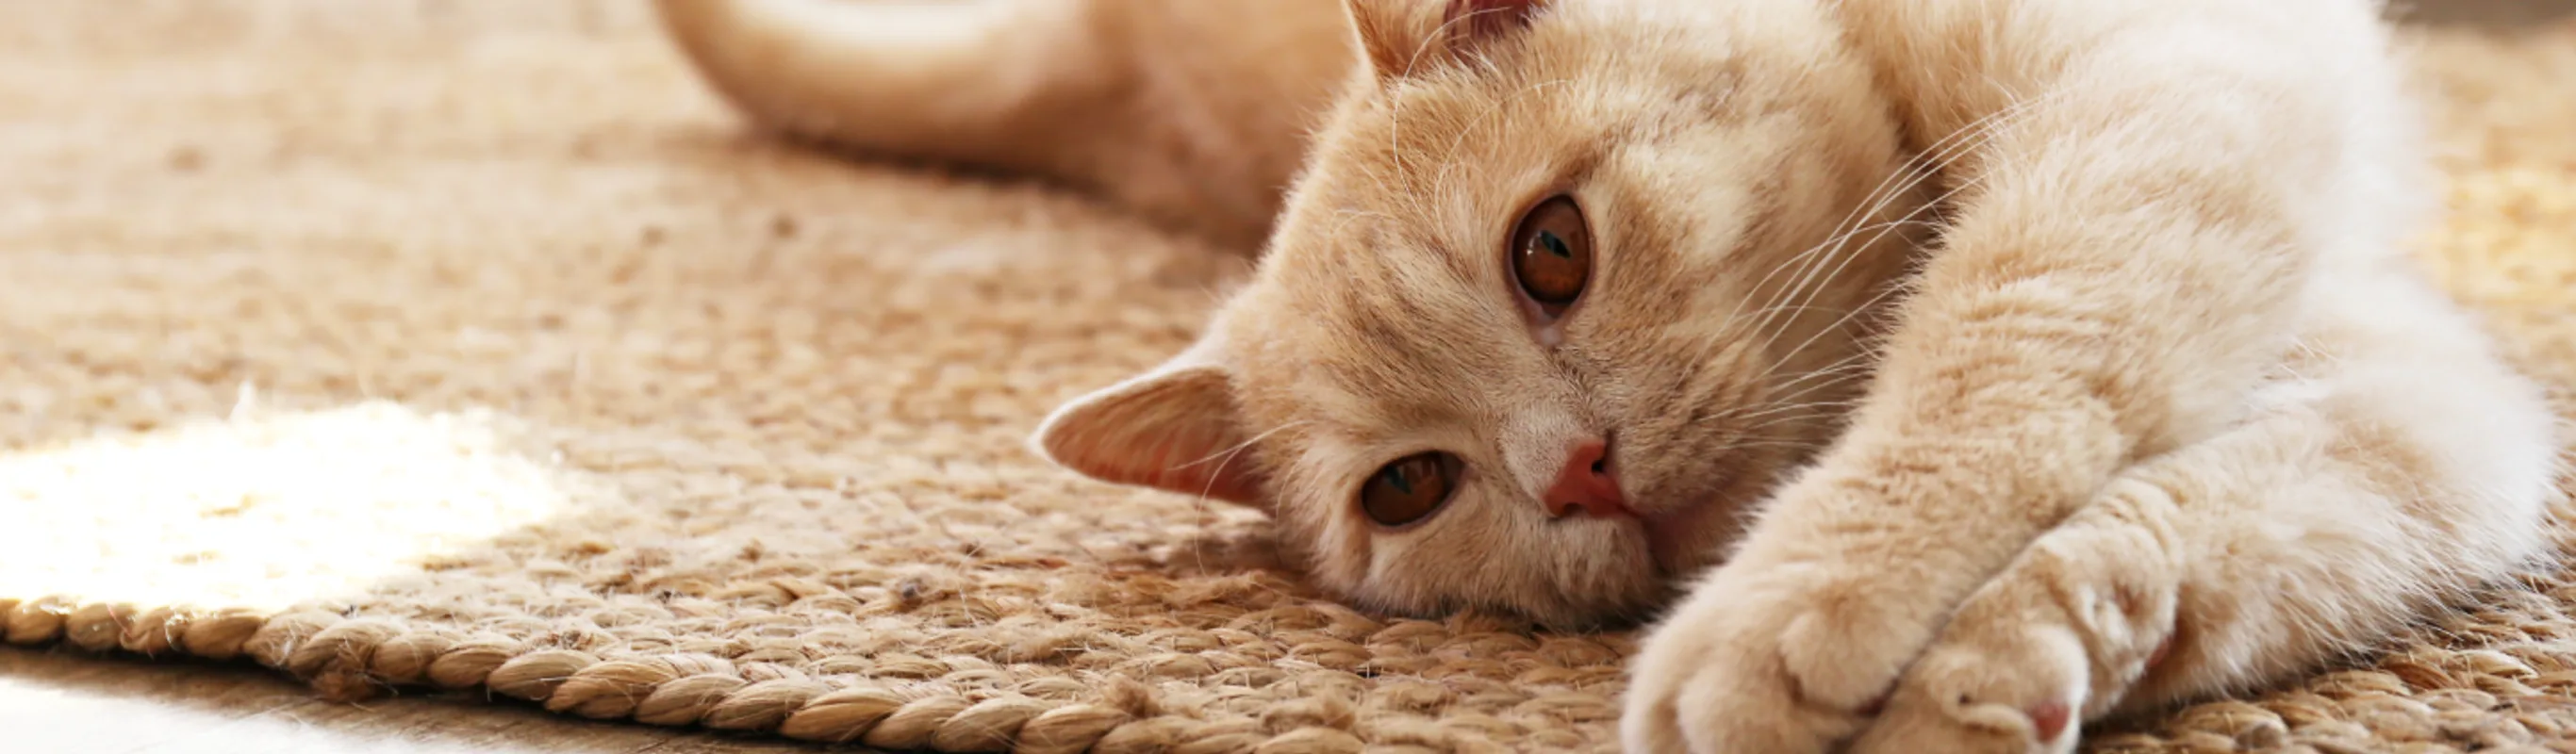 Cat laying down on the carpet